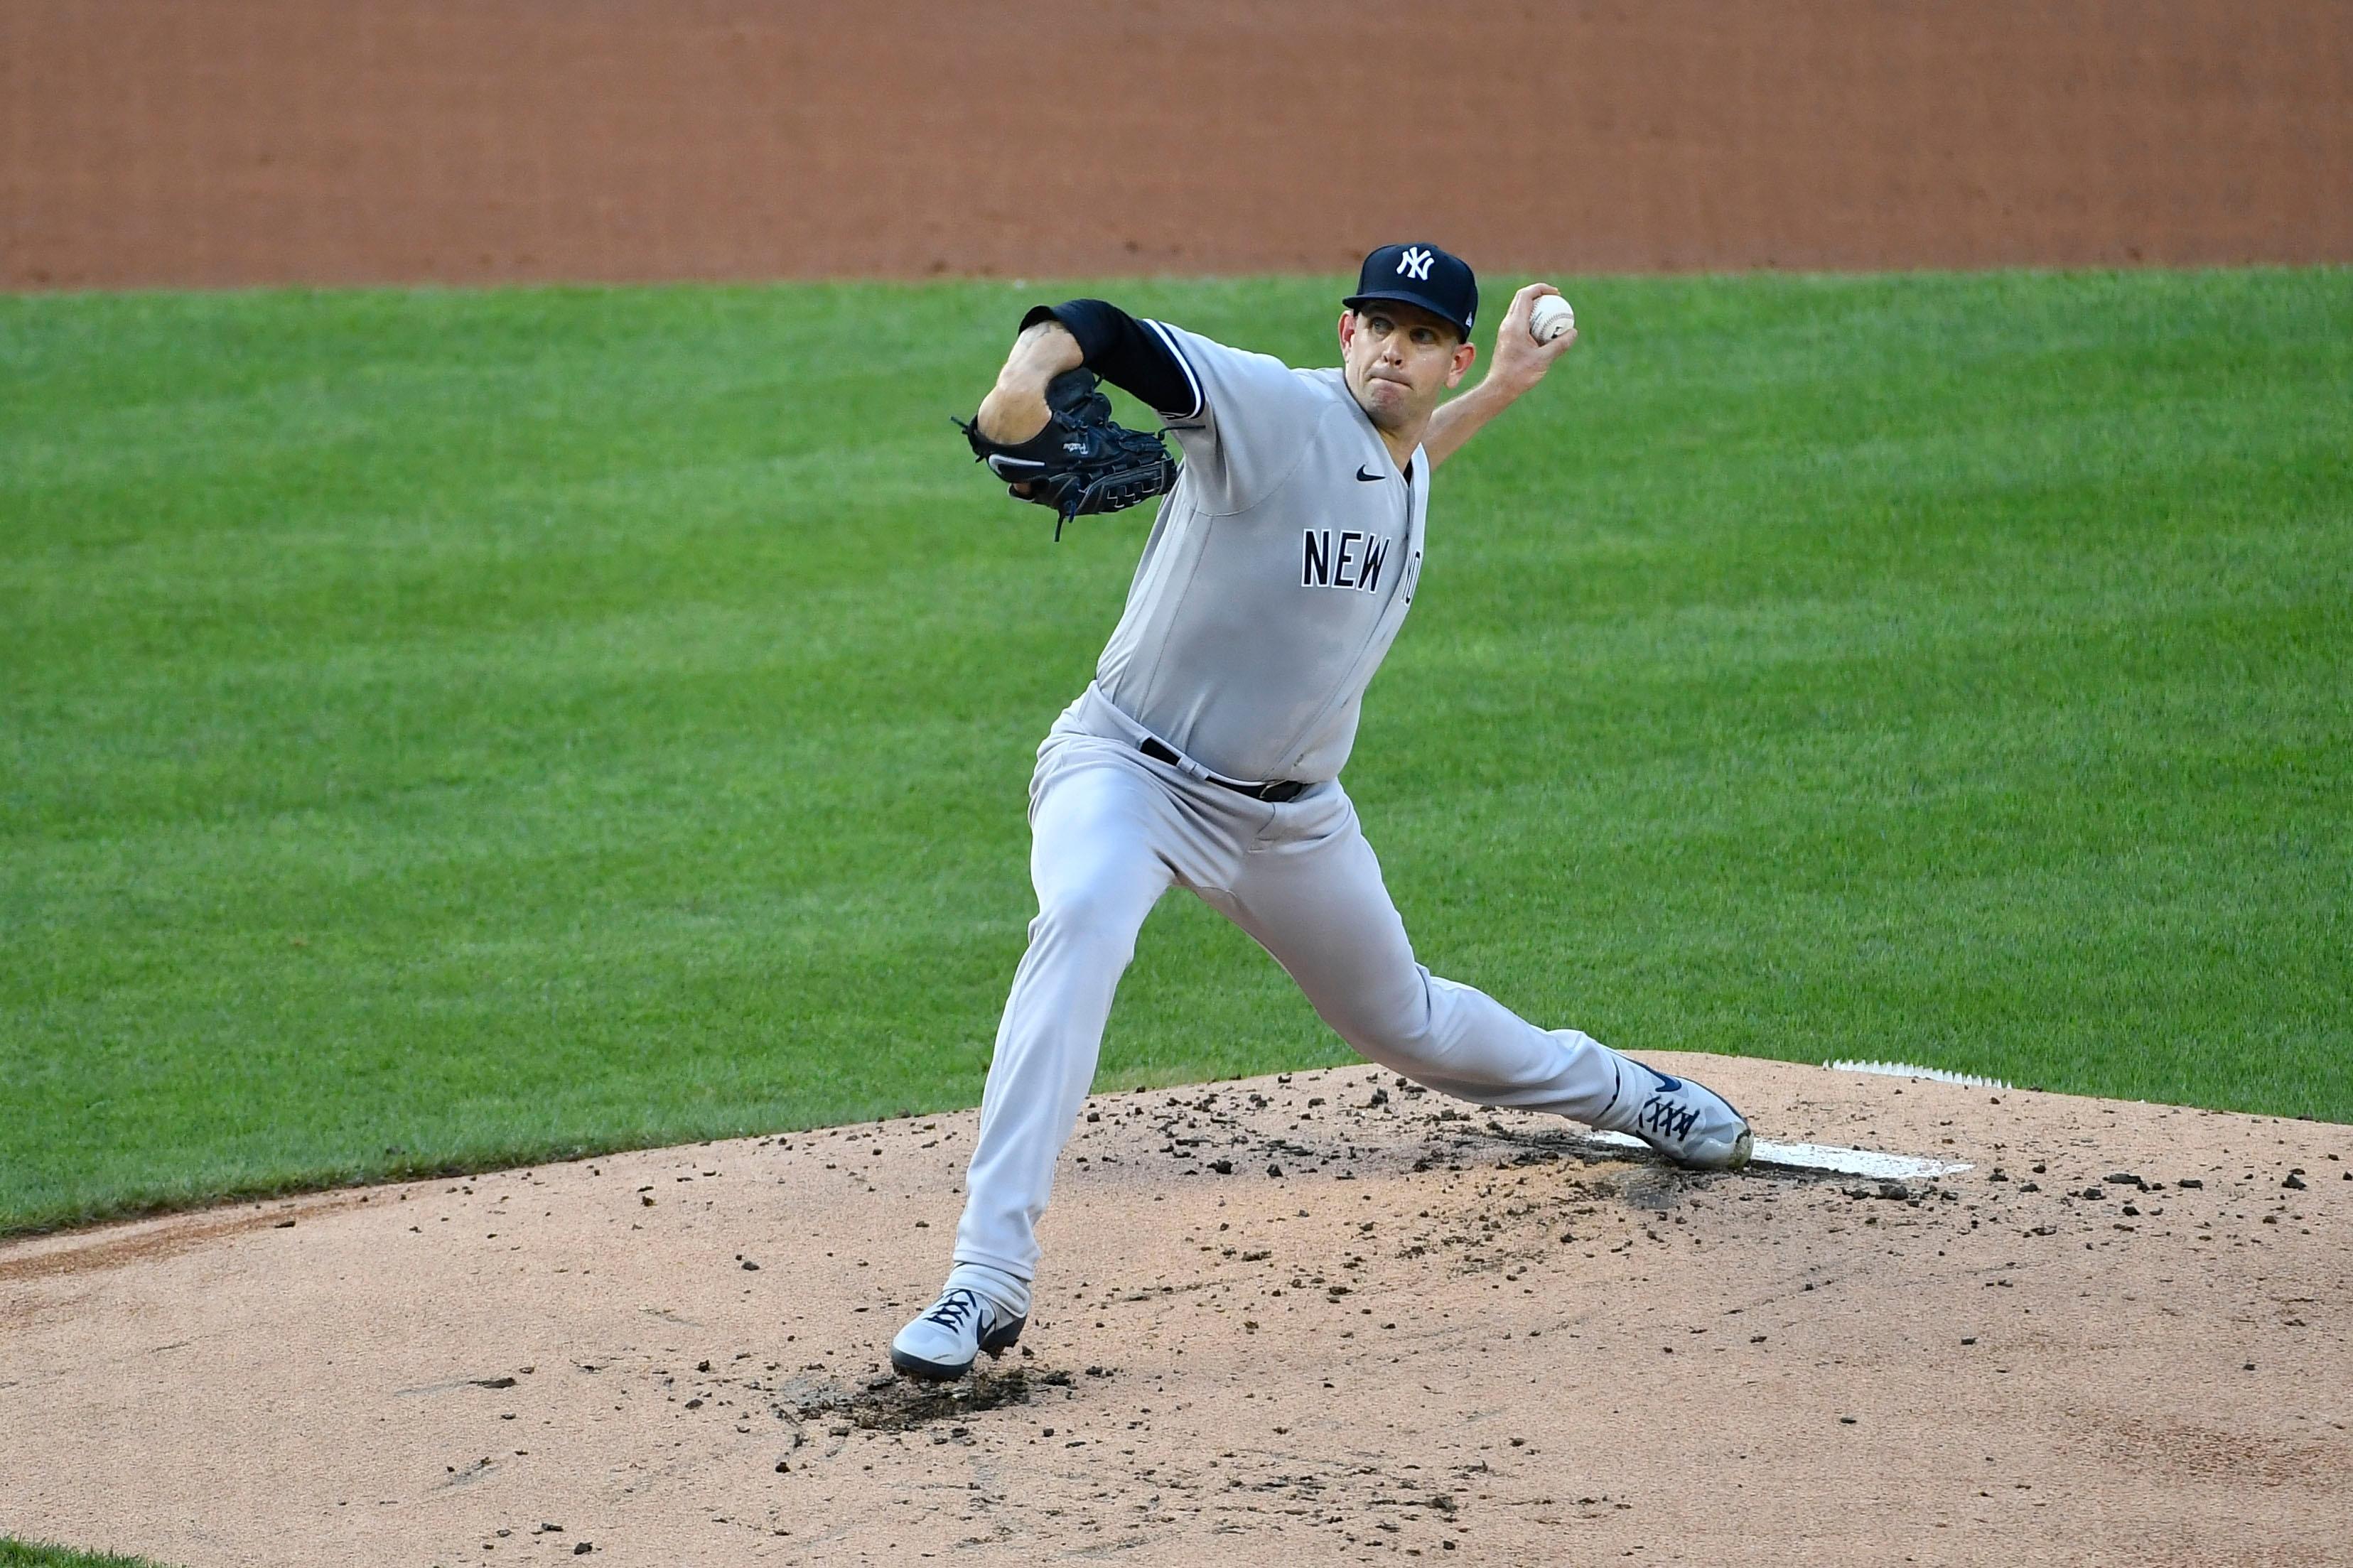 Yankees' James Paxton pitches against Nationals / USA TODAY Sports